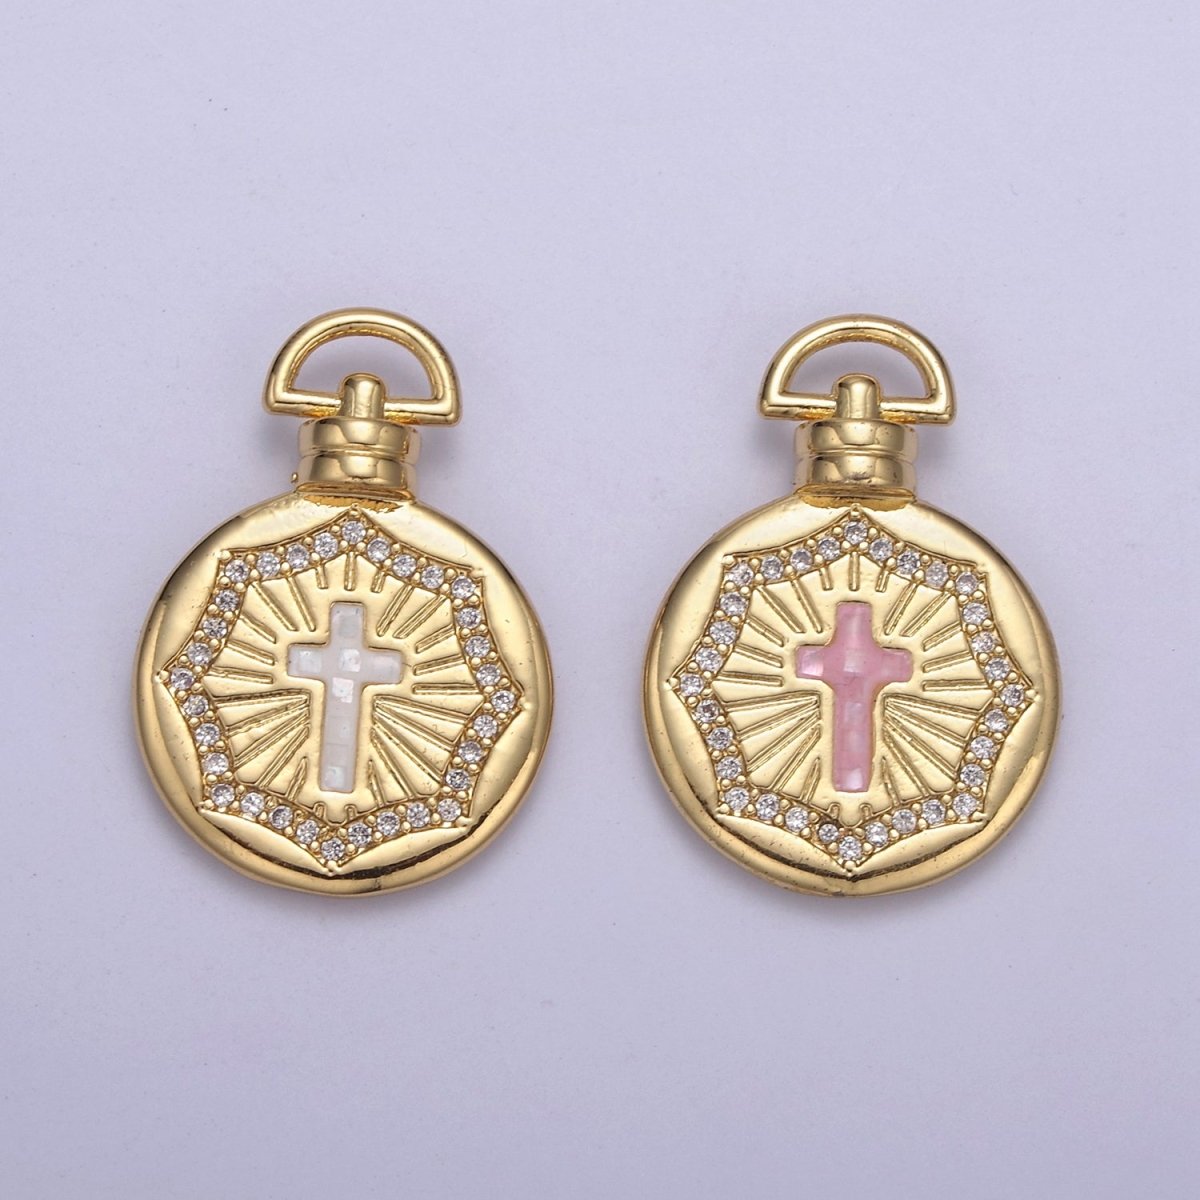 Dainty Gold Pink Shell Cross Pendant Micro Pave Round Medallion Pink / White Shell Religious Jewelry Making H-613 H-618 - DLUXCA